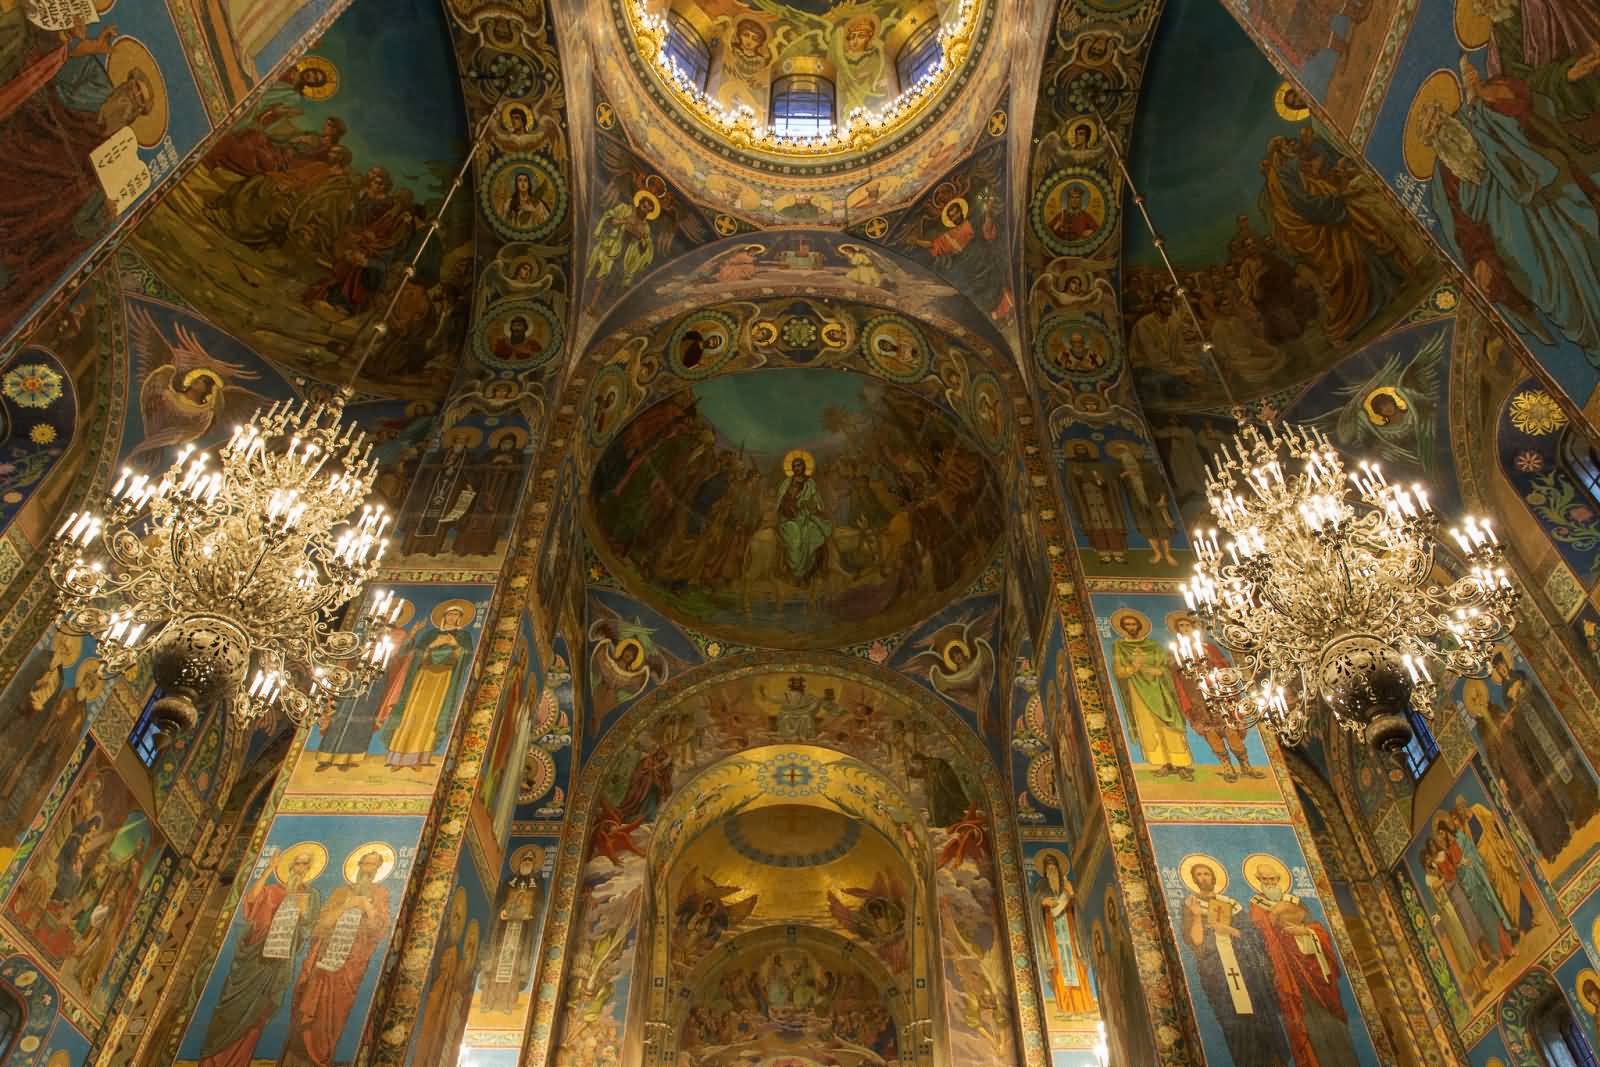 Amazing Ceiling Art Work Inside The Church Of The Savior On Blood